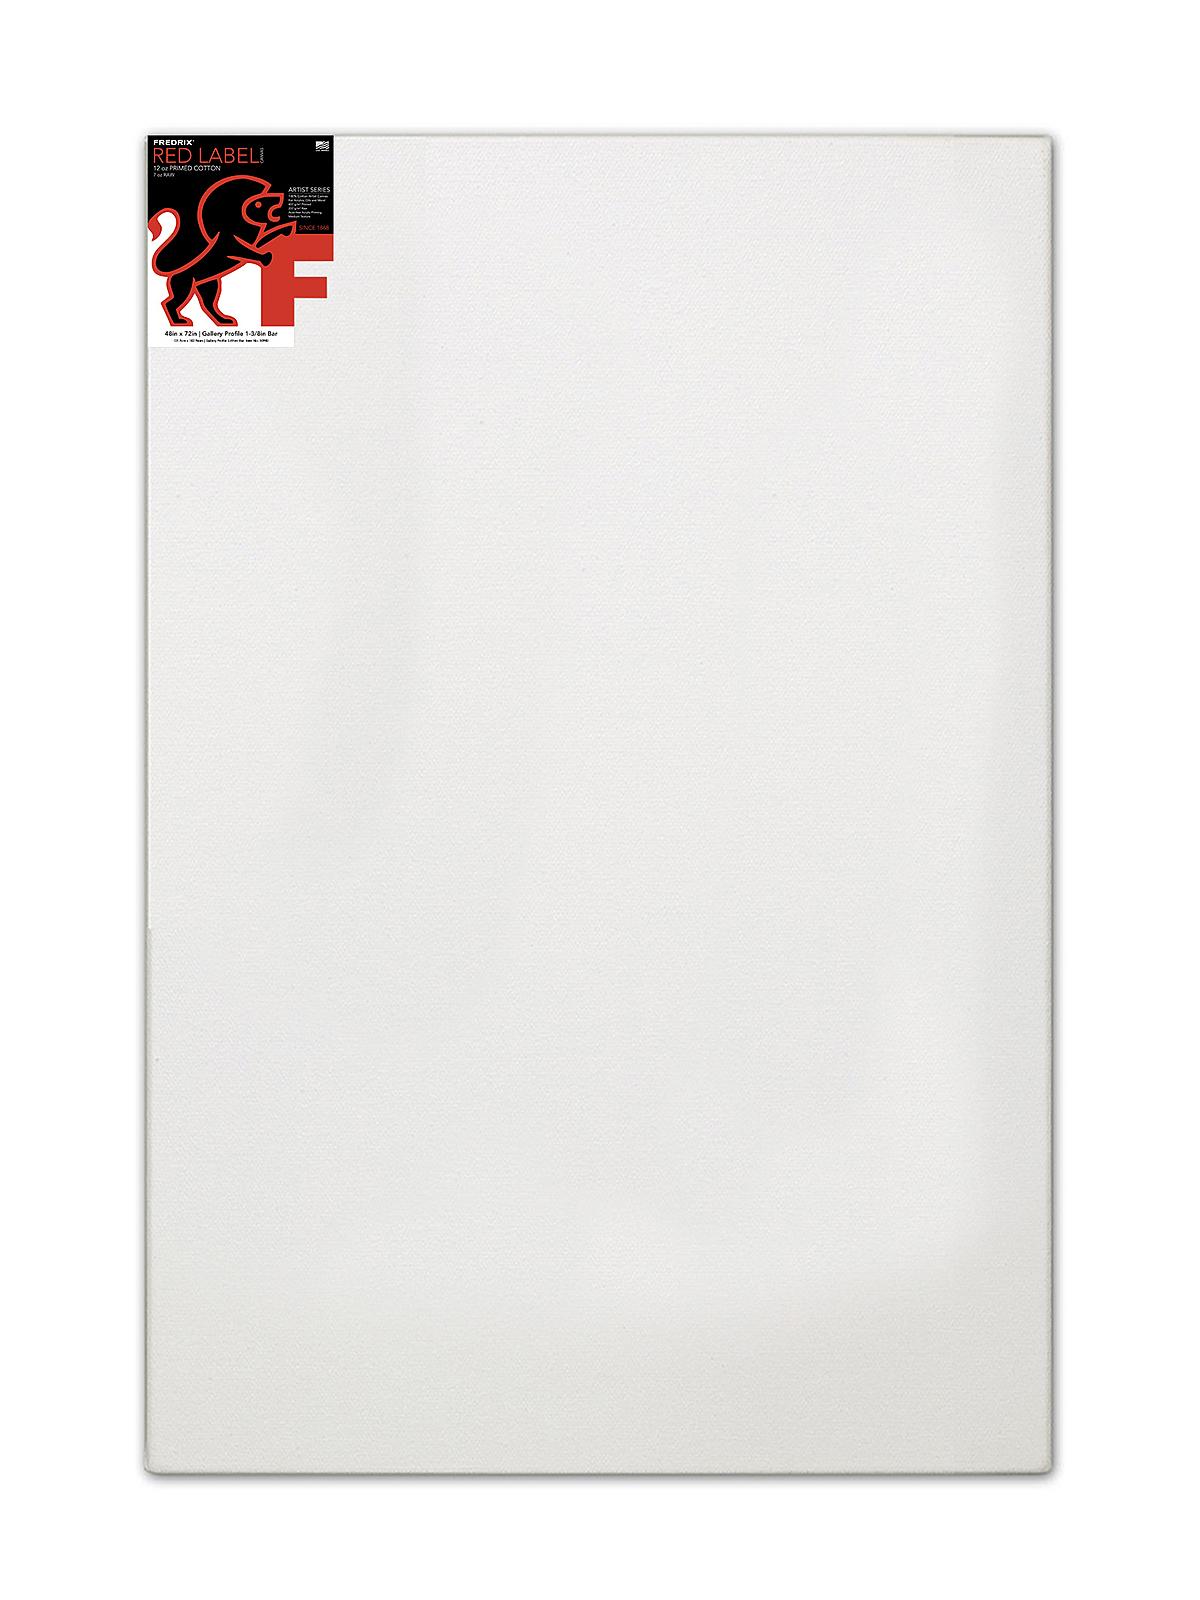 Red Label Gallerywrap Stretched Canvas 48 In. X 72 In. Each